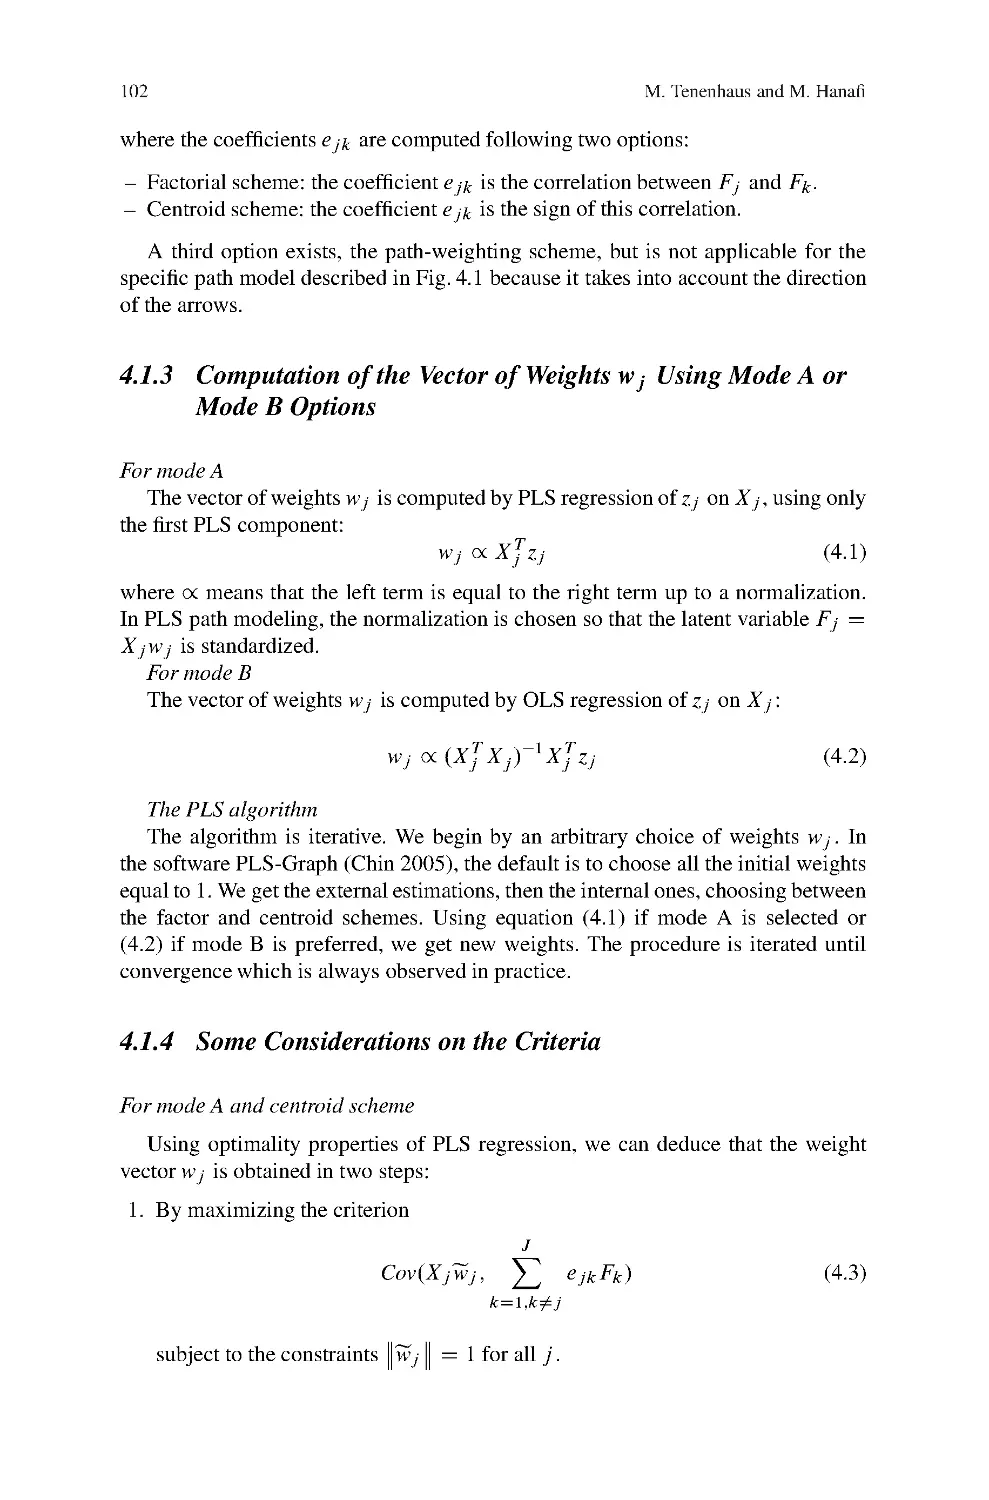 4.1.3 Computation of the Vector of Weights wj Using Mode A or Mode B Options
4.1.4 Some Considerations on the Criteria